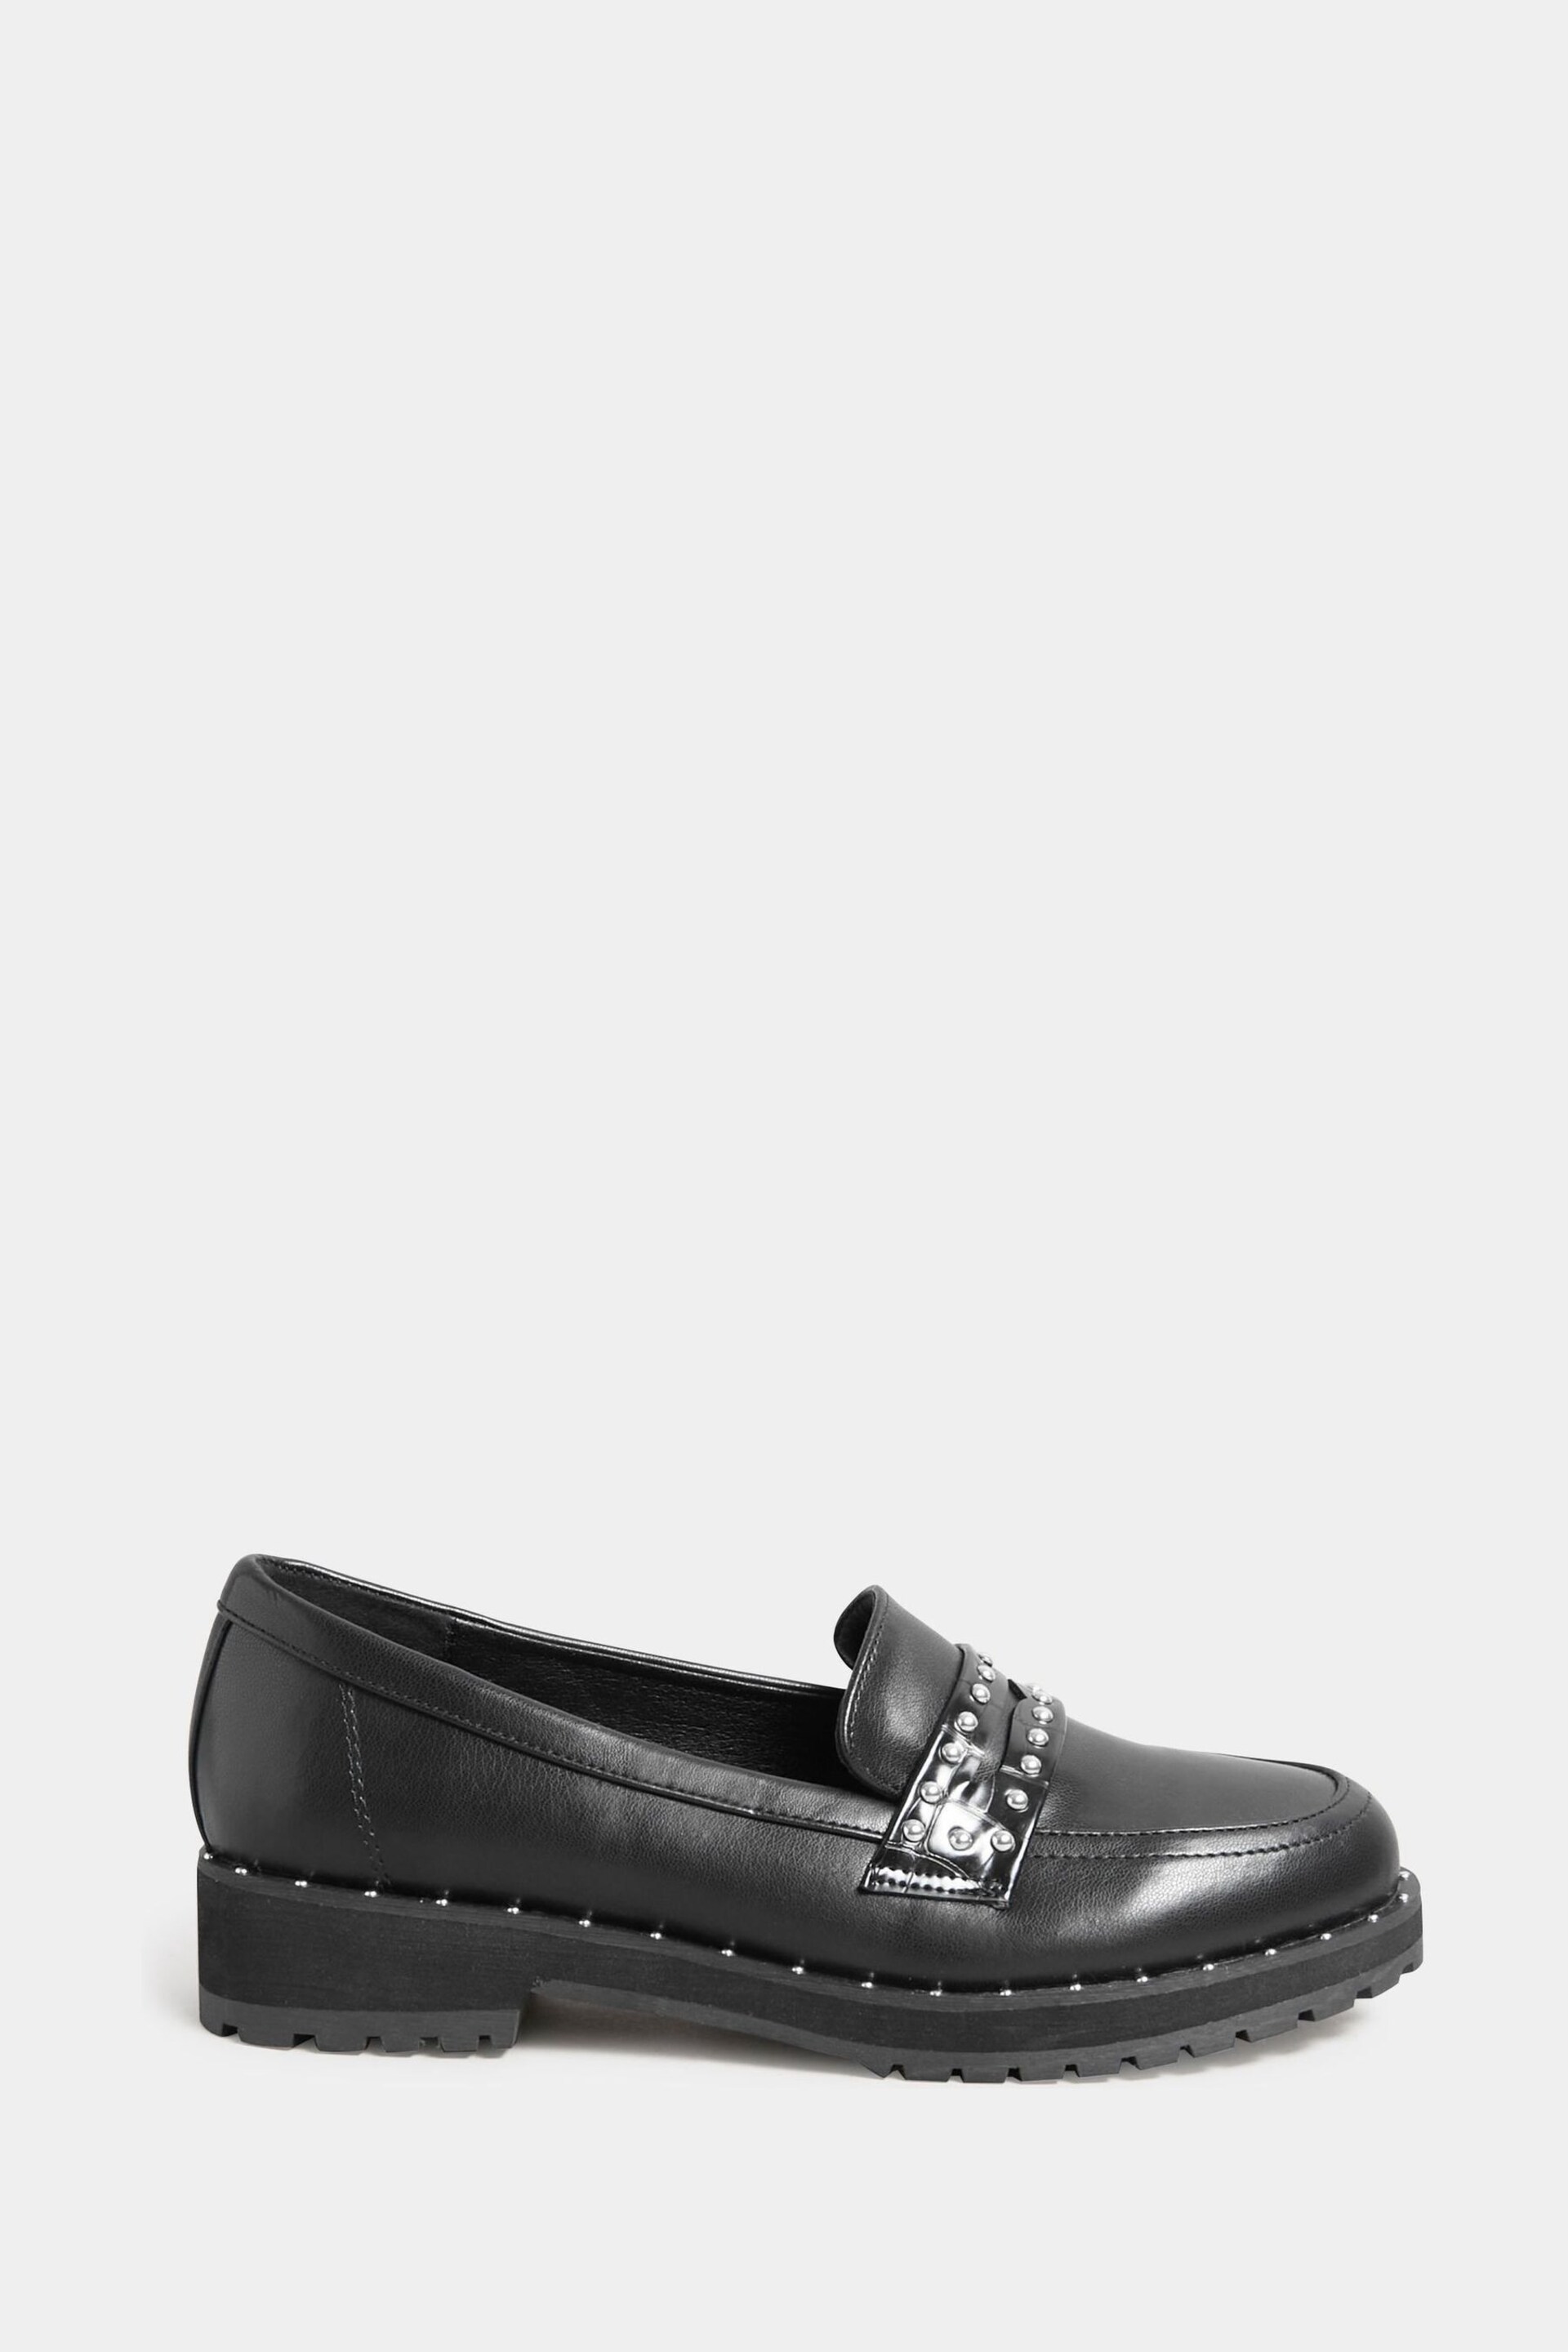 Long Tall Sally Black Studded Loafers - Image 1 of 3